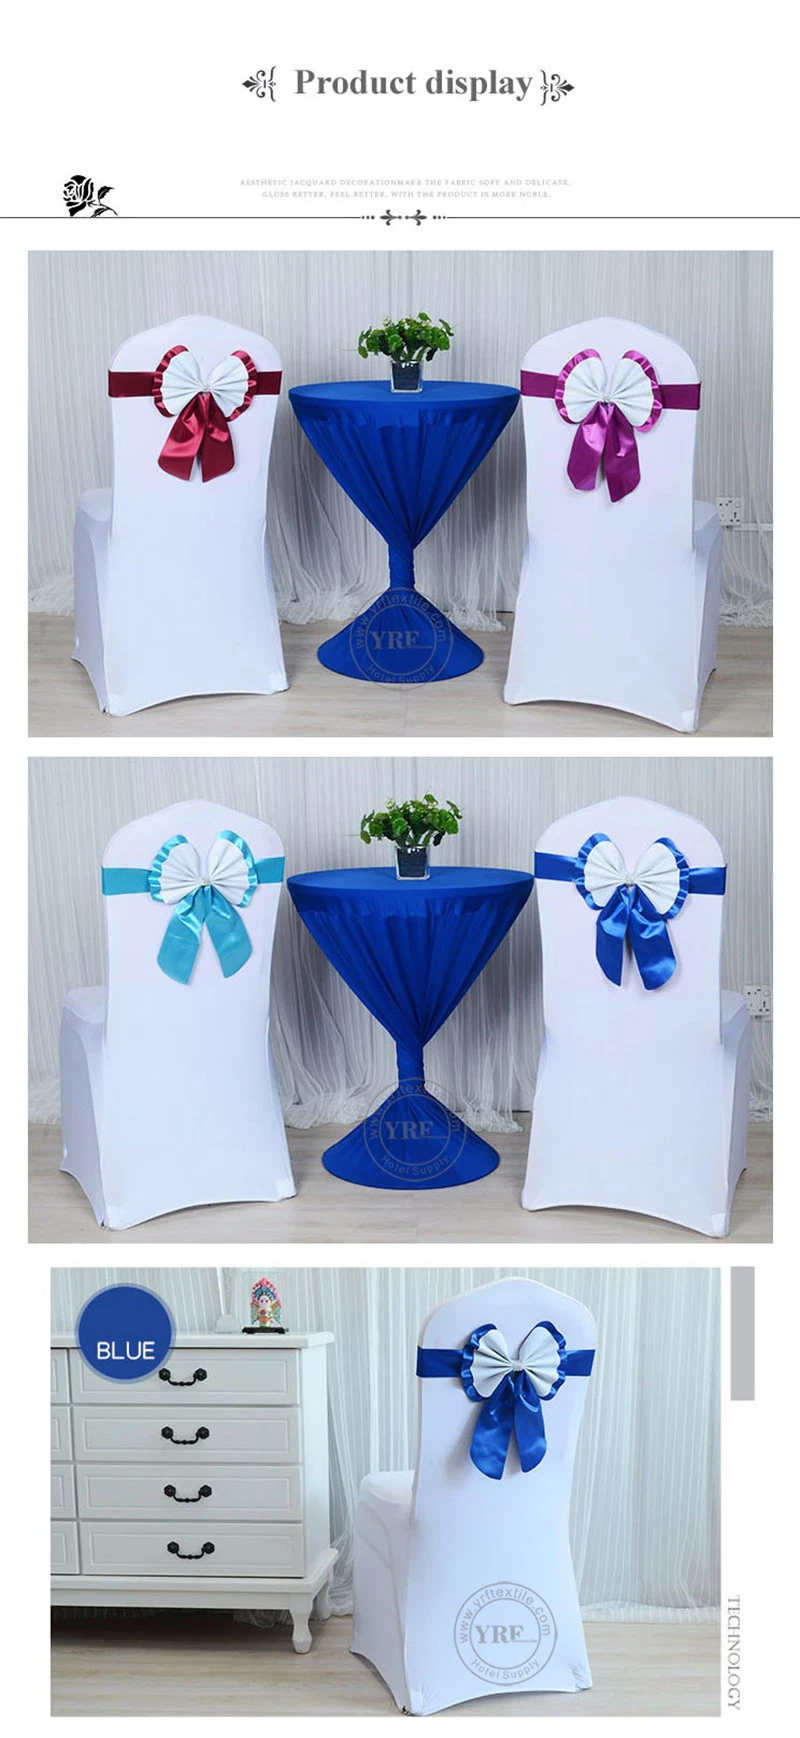 Luxury Lodge Wedding Chair Cover Sashes for Sale